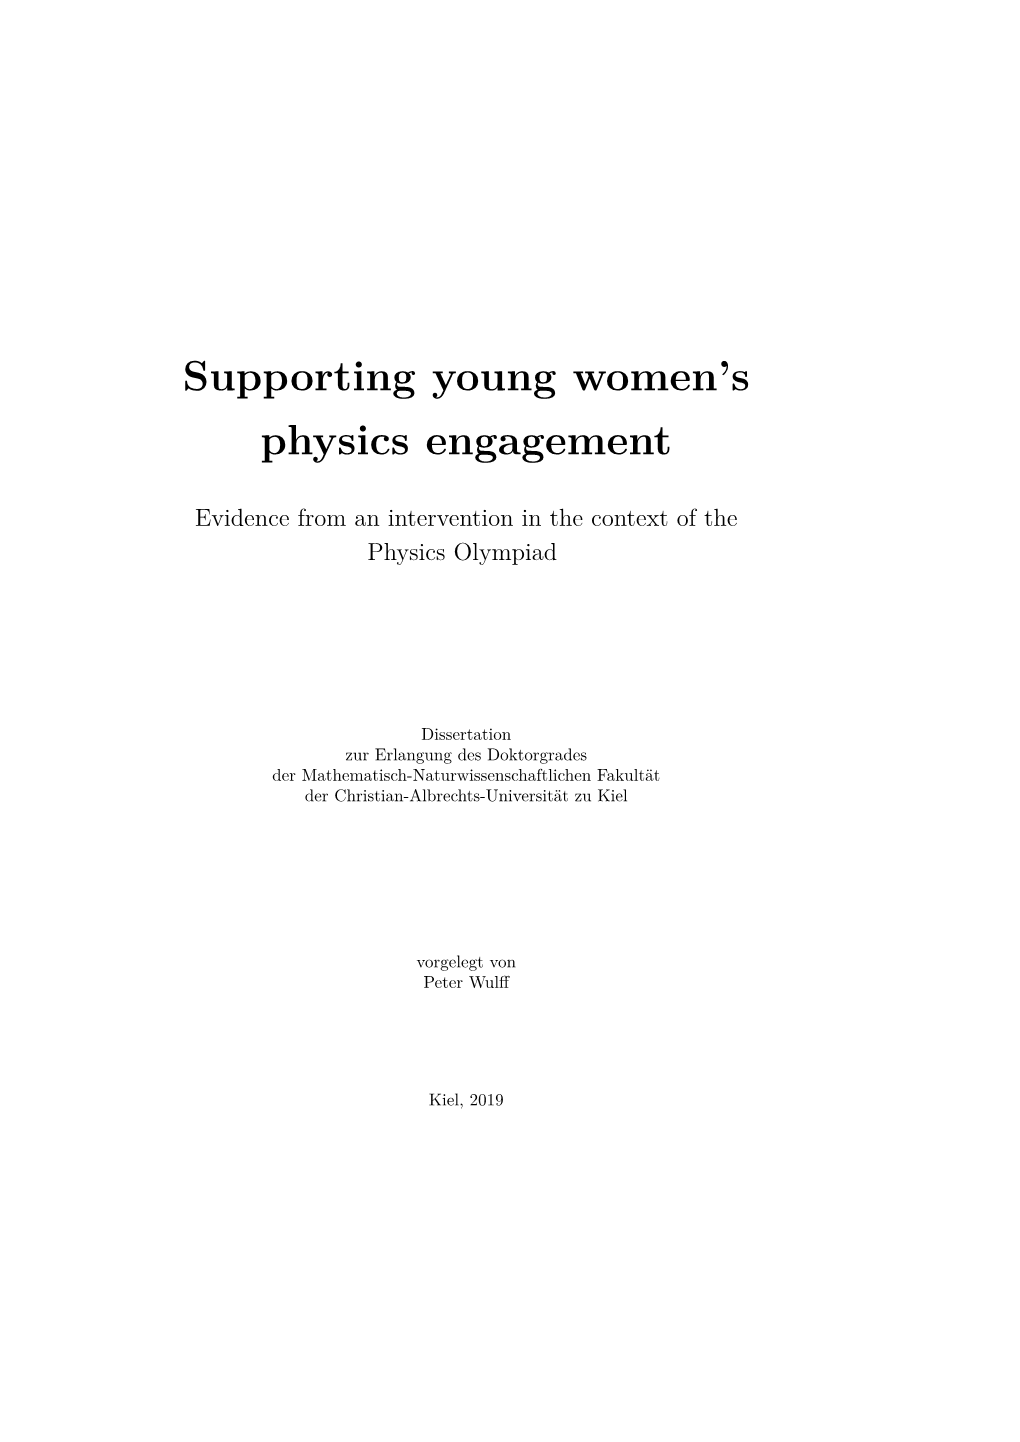 Supporting Young Women's Physics Engagement